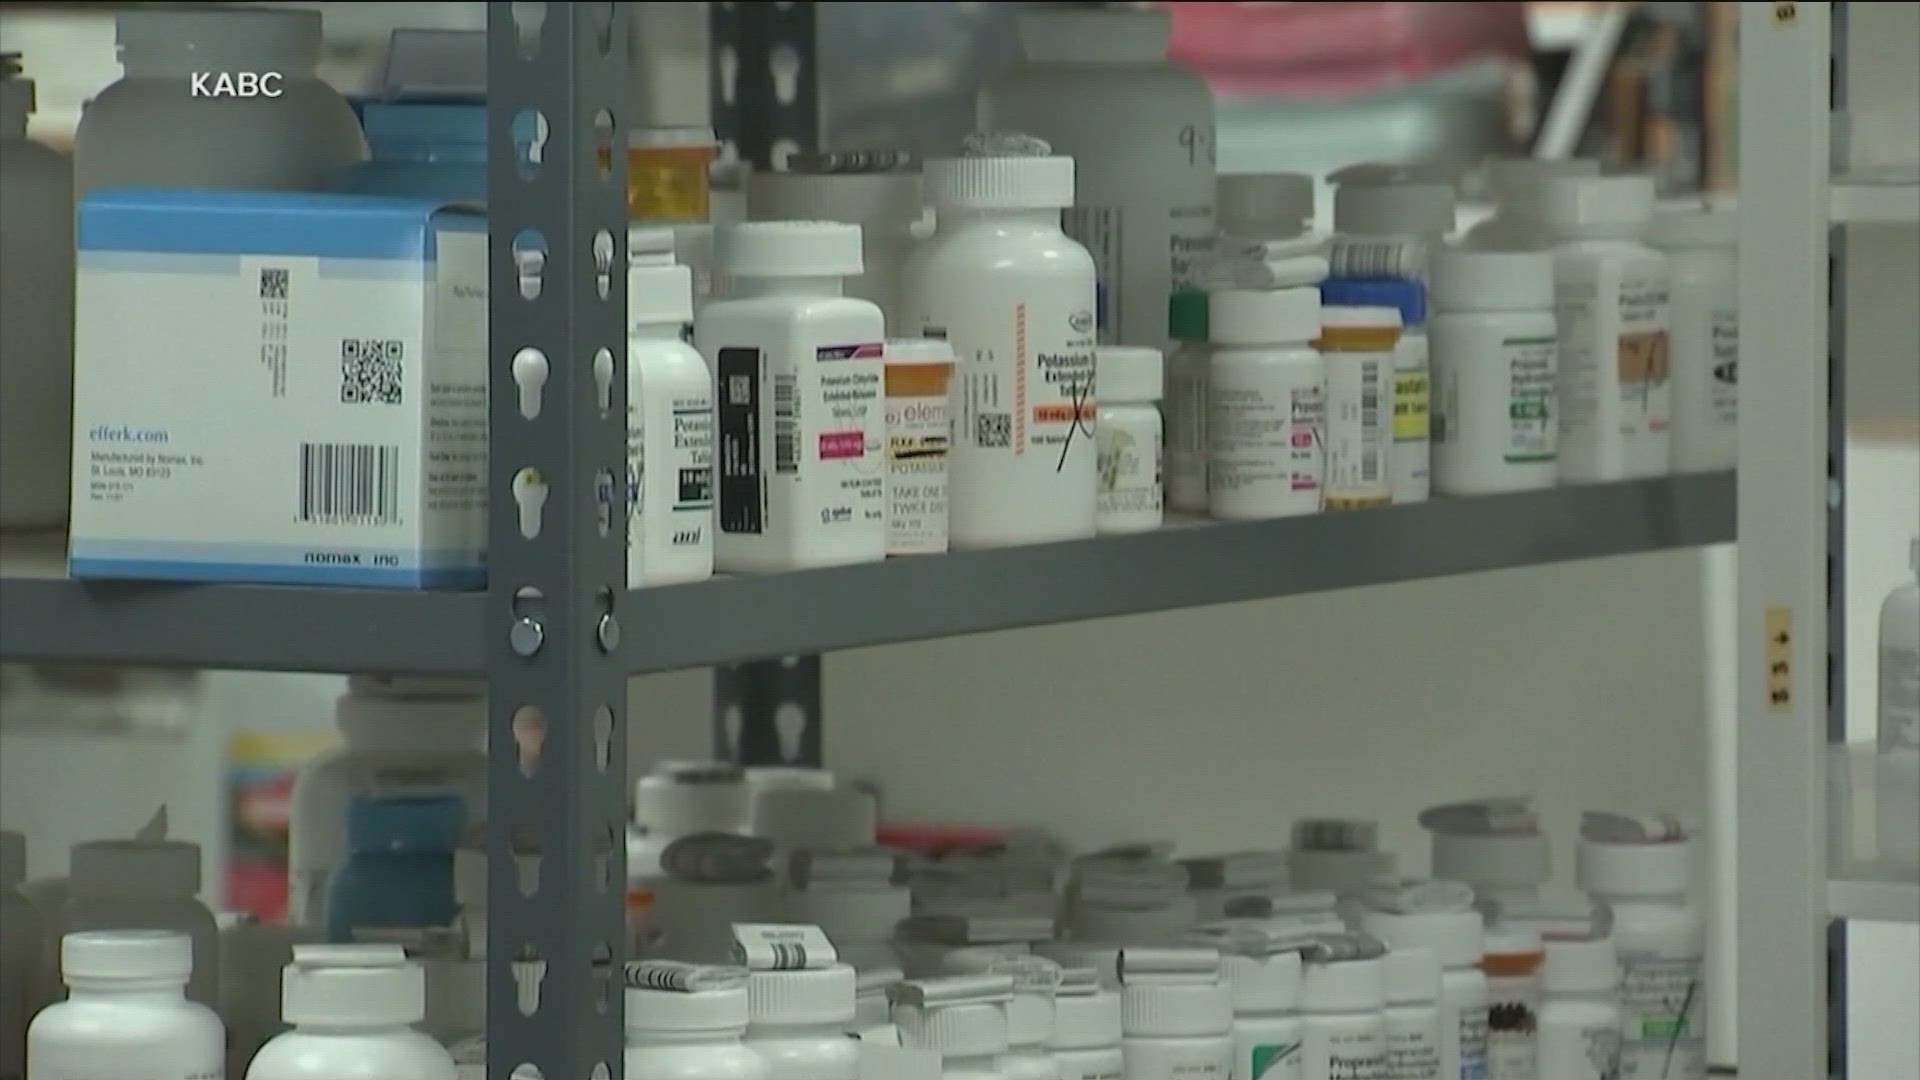 Currently, there are 323 prescription drugs on the shortage list, a new record.